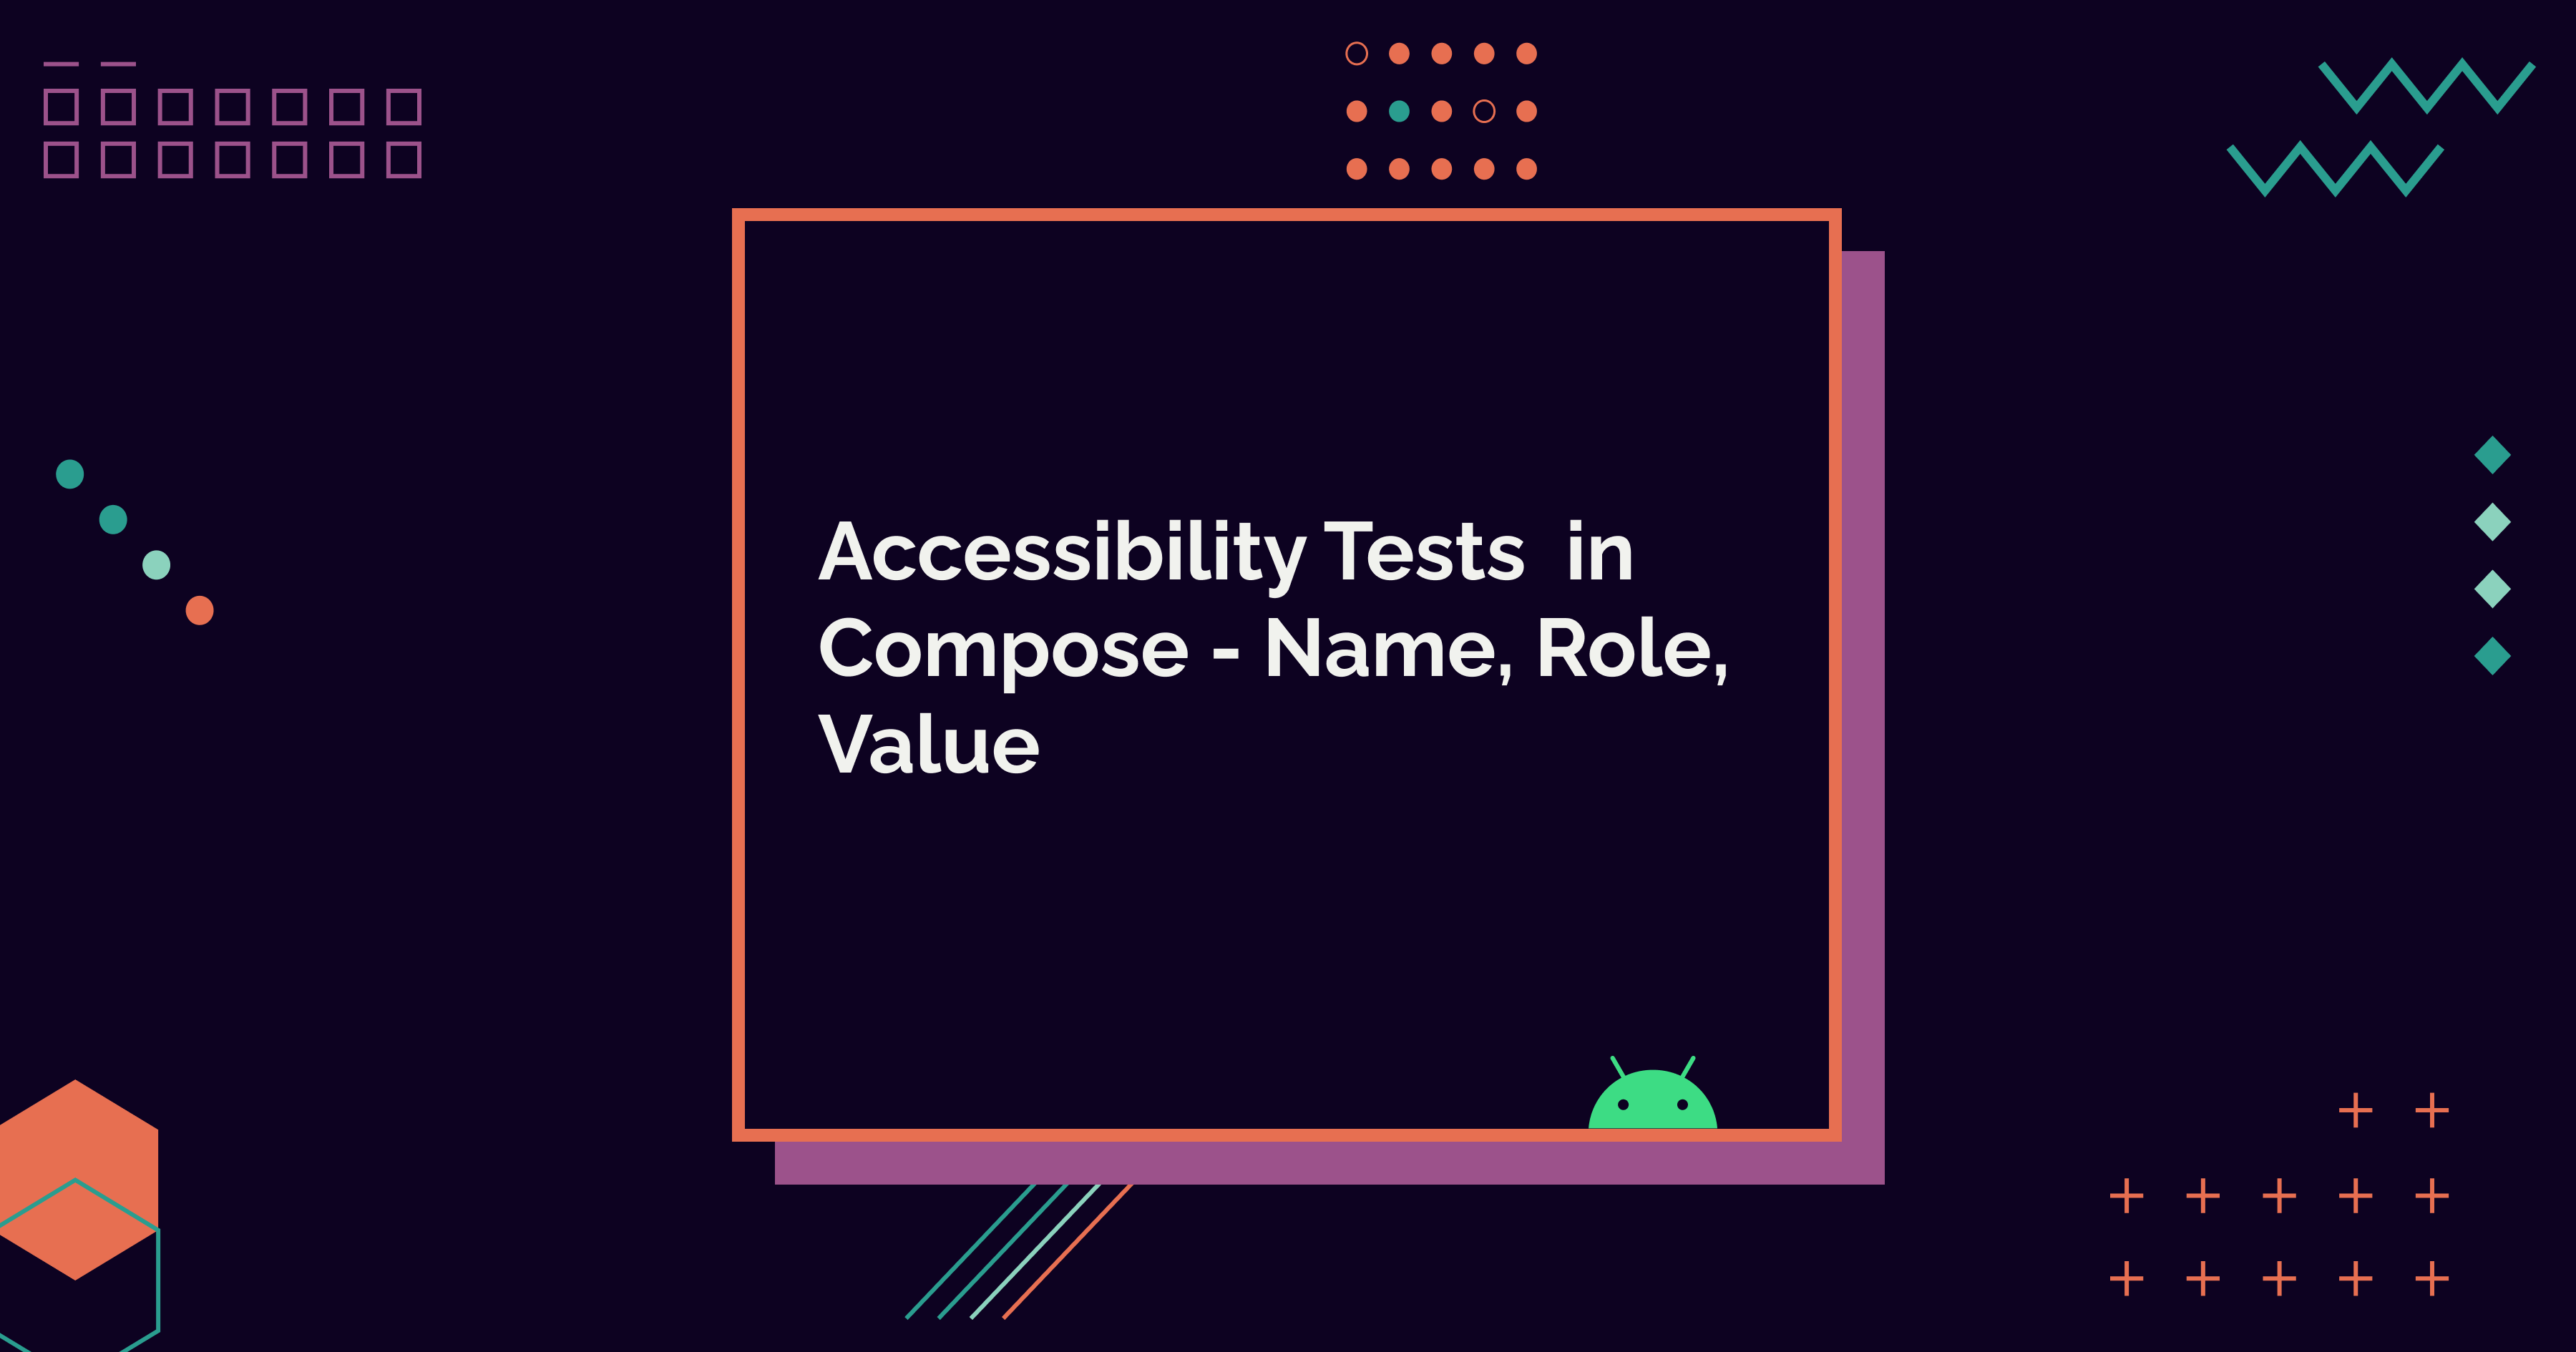 Accessibility Tests  in Compose - Name, Role, Value